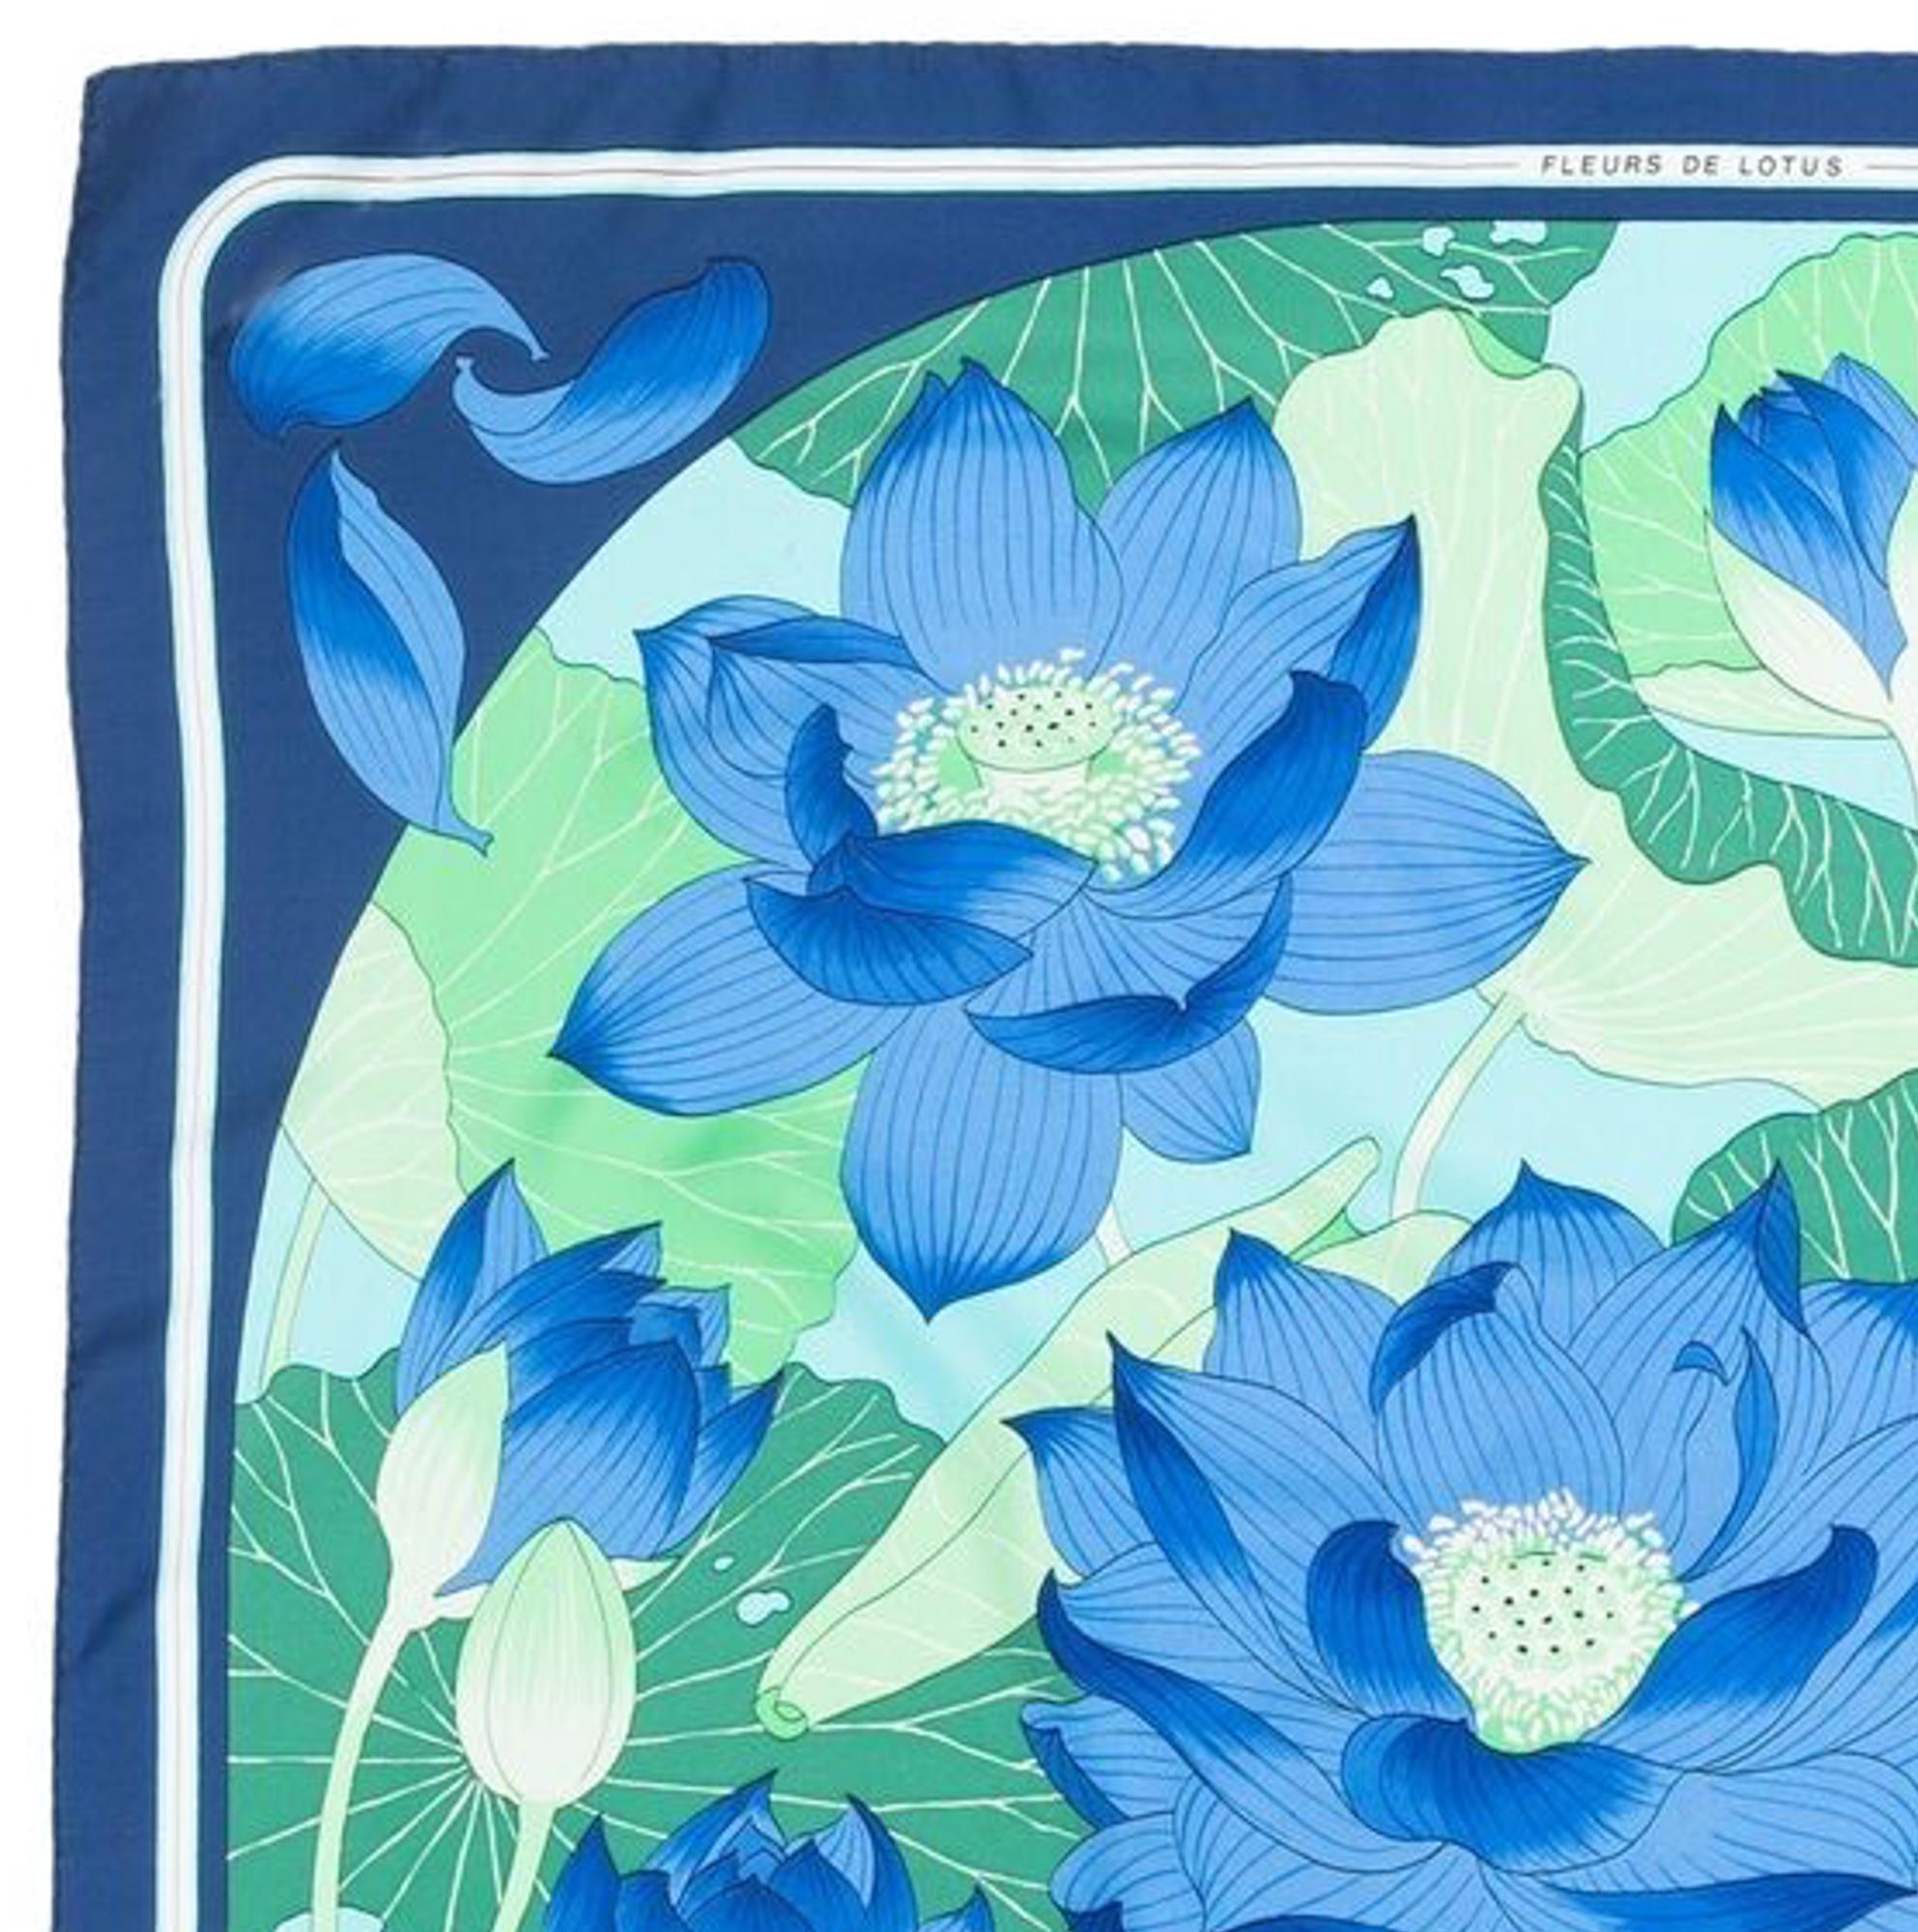 Hermes silk scarf Fleurs de Lotus by Christiane Vauzelle featuring blue, turquoise lotus floral scene.
Circa 1976s 
In excellent vintage condition. Made in France.
35,4in. (90cm)  X 35,4in. (90cm)
We guarantee you will receive this  iconic item as